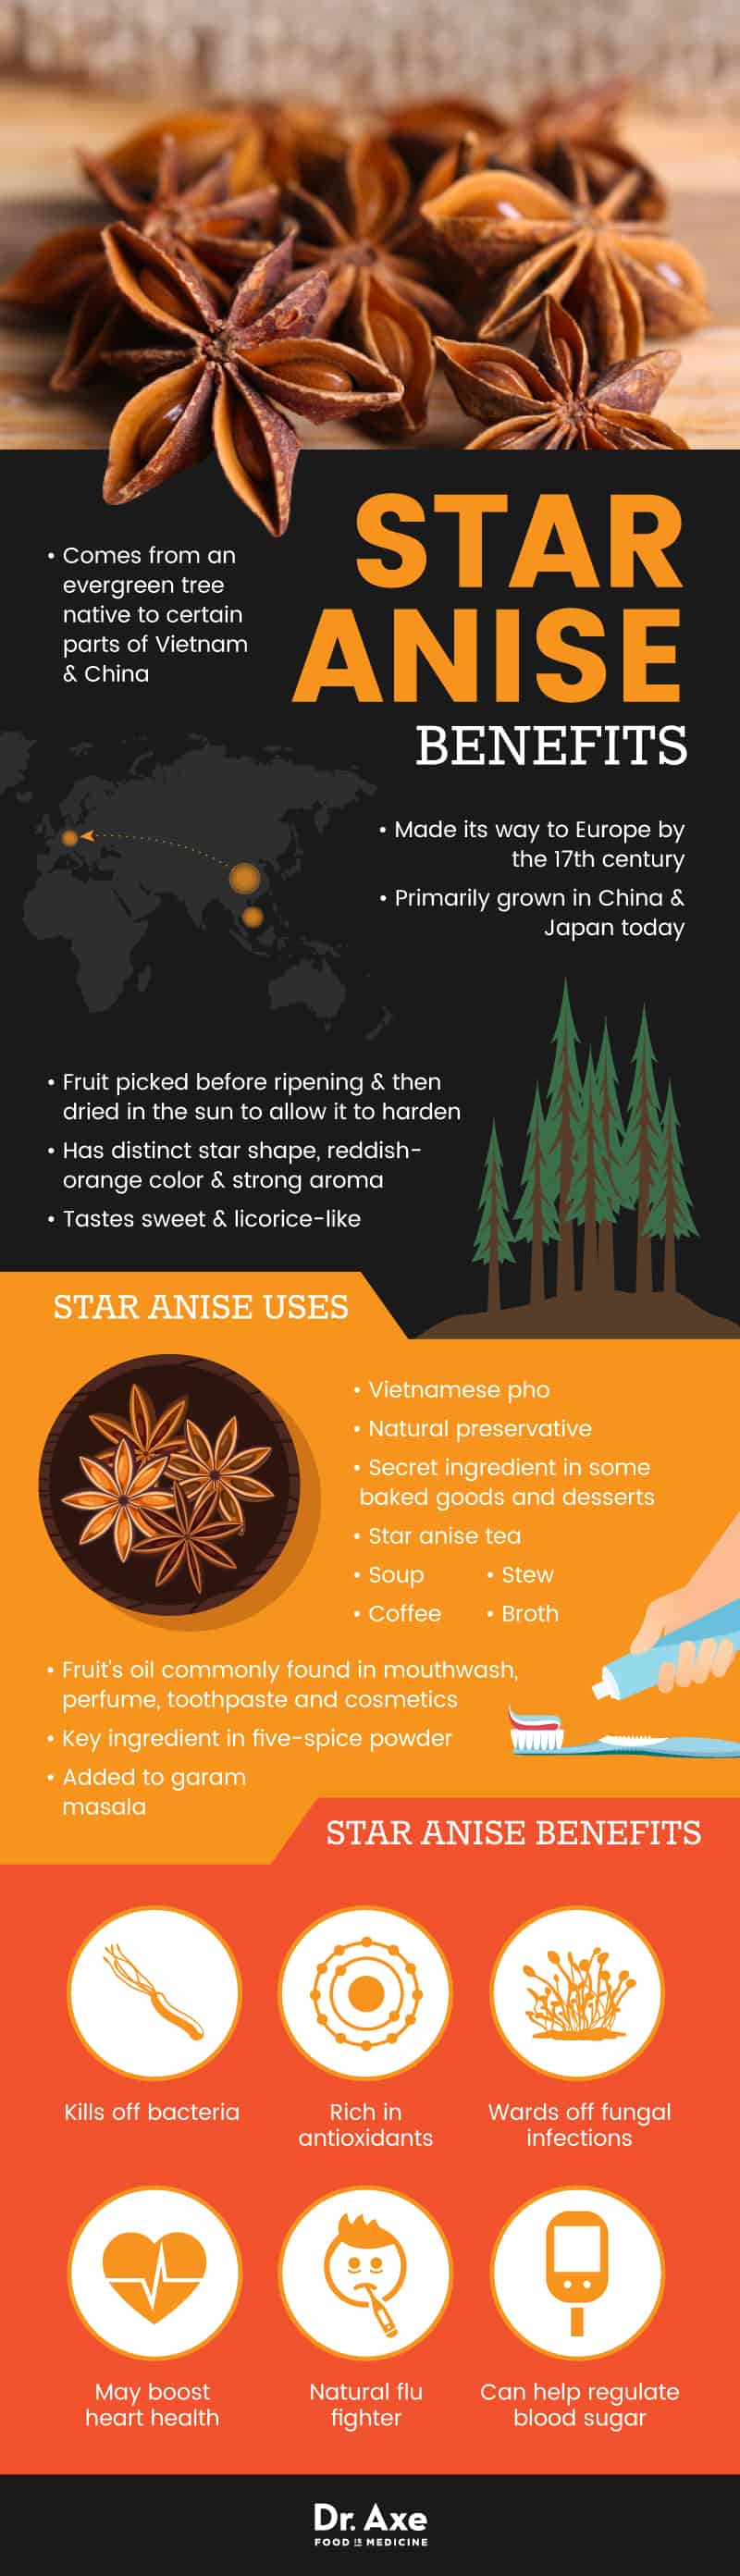 Star anise benefits - Dr. Axe